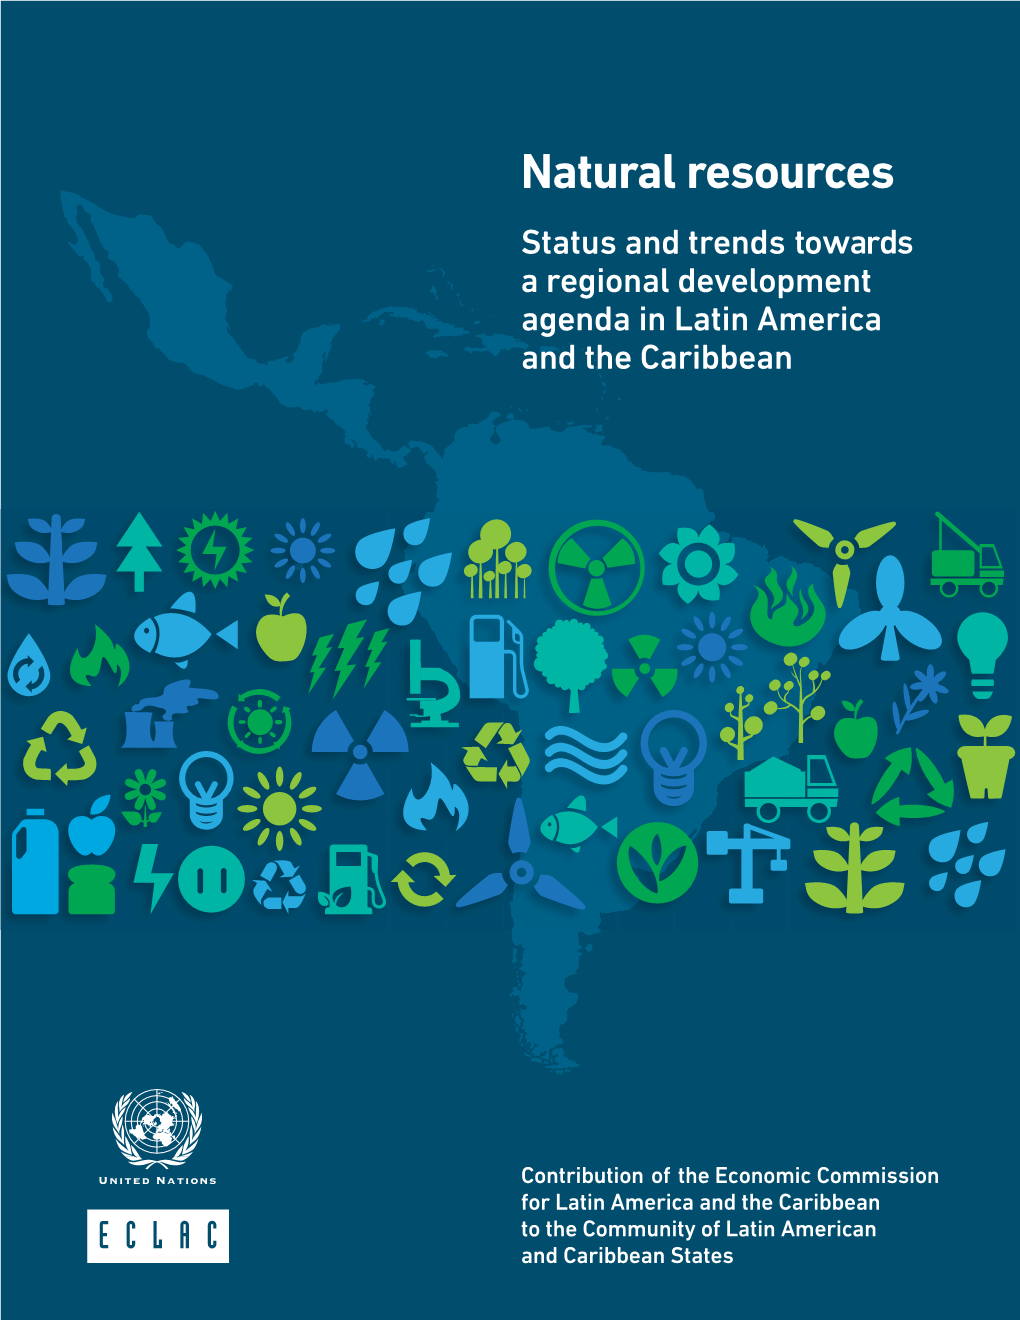 Natural Resources: Status and Trends Towards a Regional Development Agenda in Latin America and the Caribbean